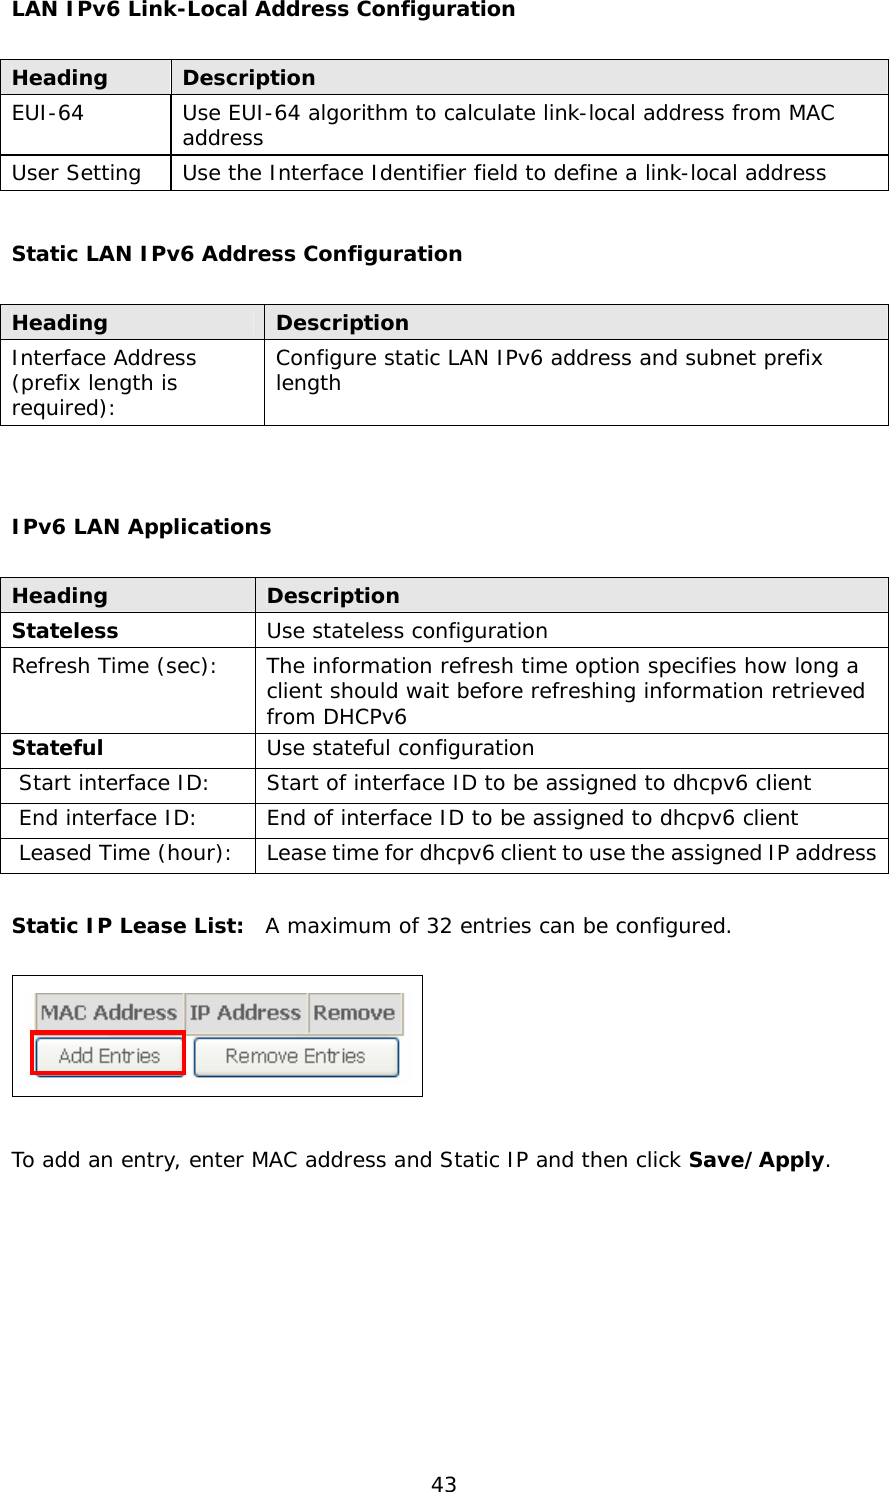  43 LAN IPv6 Link-Local Address Configuration  Heading  Description EUI-64  Use EUI-64 algorithm to calculate link-local address from MAC address User Setting  Use the Interface Identifier field to define a link-local address  Static LAN IPv6 Address Configuration  Heading  Description Interface Address  (prefix length is required): Configure static LAN IPv6 address and subnet prefix length   IPv6 LAN Applications  Heading  Description Stateless  Use stateless configuration Refresh Time (sec):  The information refresh time option specifies how long a client should wait before refreshing information retrieved from DHCPv6 Stateful  Use stateful configuration  Start interface ID:  Start of interface ID to be assigned to dhcpv6 client  End interface ID:  End of interface ID to be assigned to dhcpv6 client  Leased Time (hour):  Lease time for dhcpv6 client to use the assigned IP address  Static IP Lease List:  A maximum of 32 entries can be configured.    To add an entry, enter MAC address and Static IP and then click Save/Apply.        